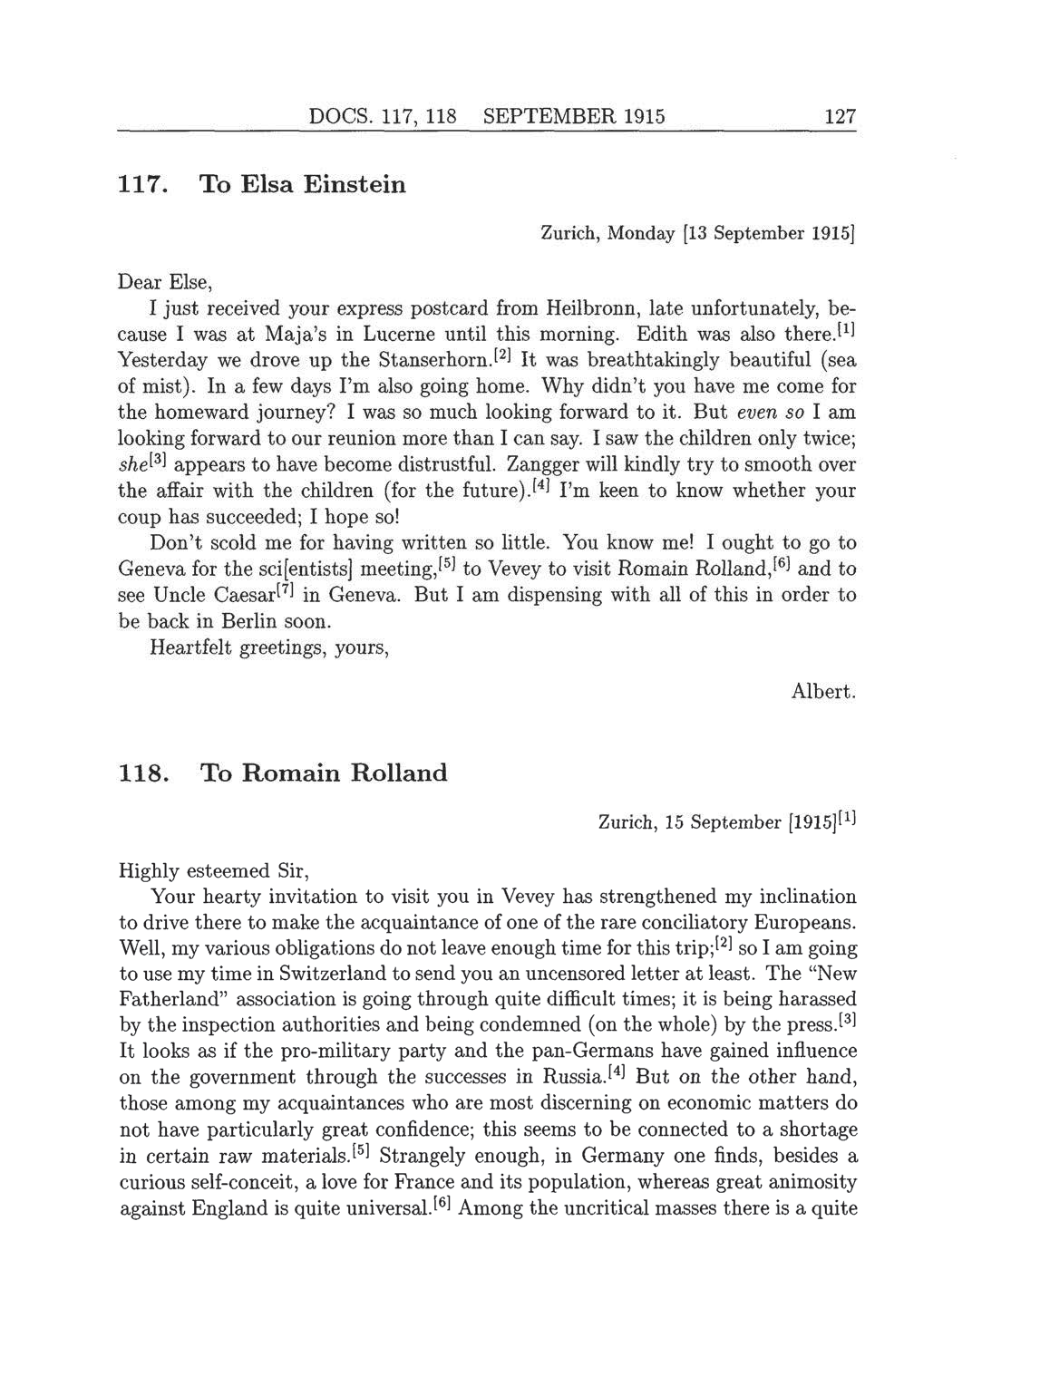 Volume 8: The Berlin Years: Correspondence, 1914-1918 (English translation supplement) page 127